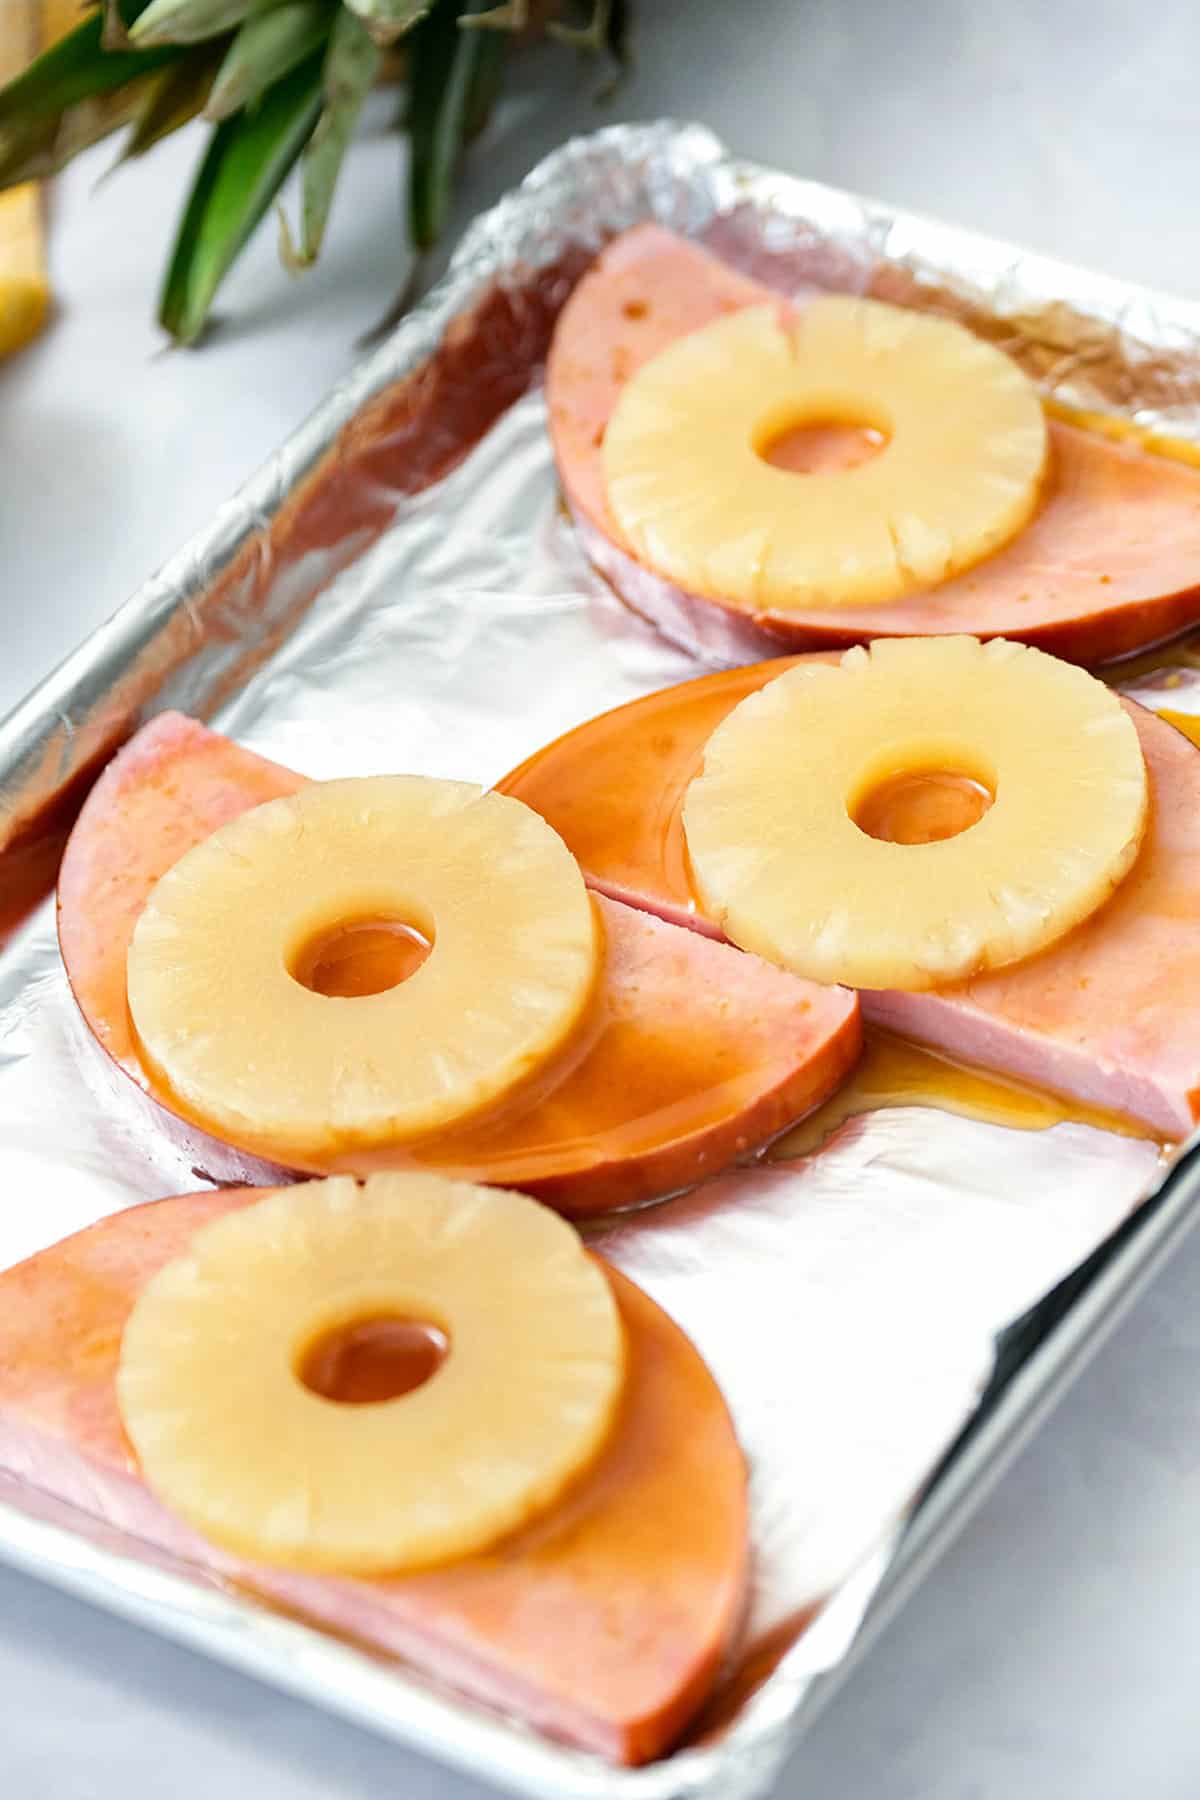 Ham Steaks with Pineapple Slices Smothered in Glaze on Baking Pan